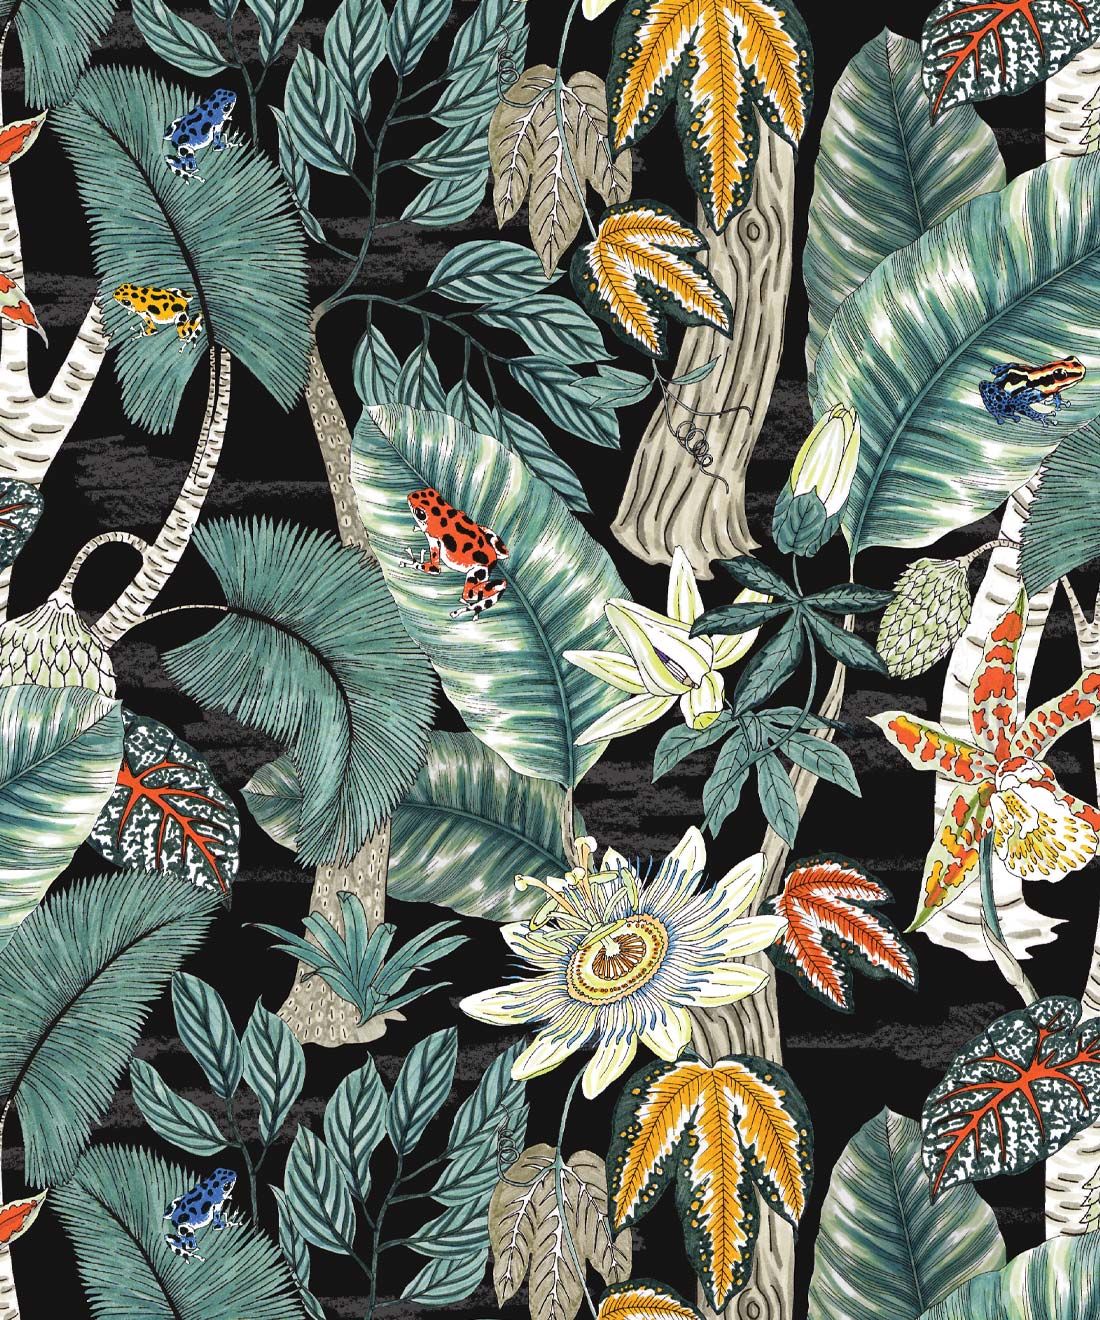 Amazonian Frogs Wallpaper • Tropical Leaves Wallpaper • Jacqueline Colley • Swatch